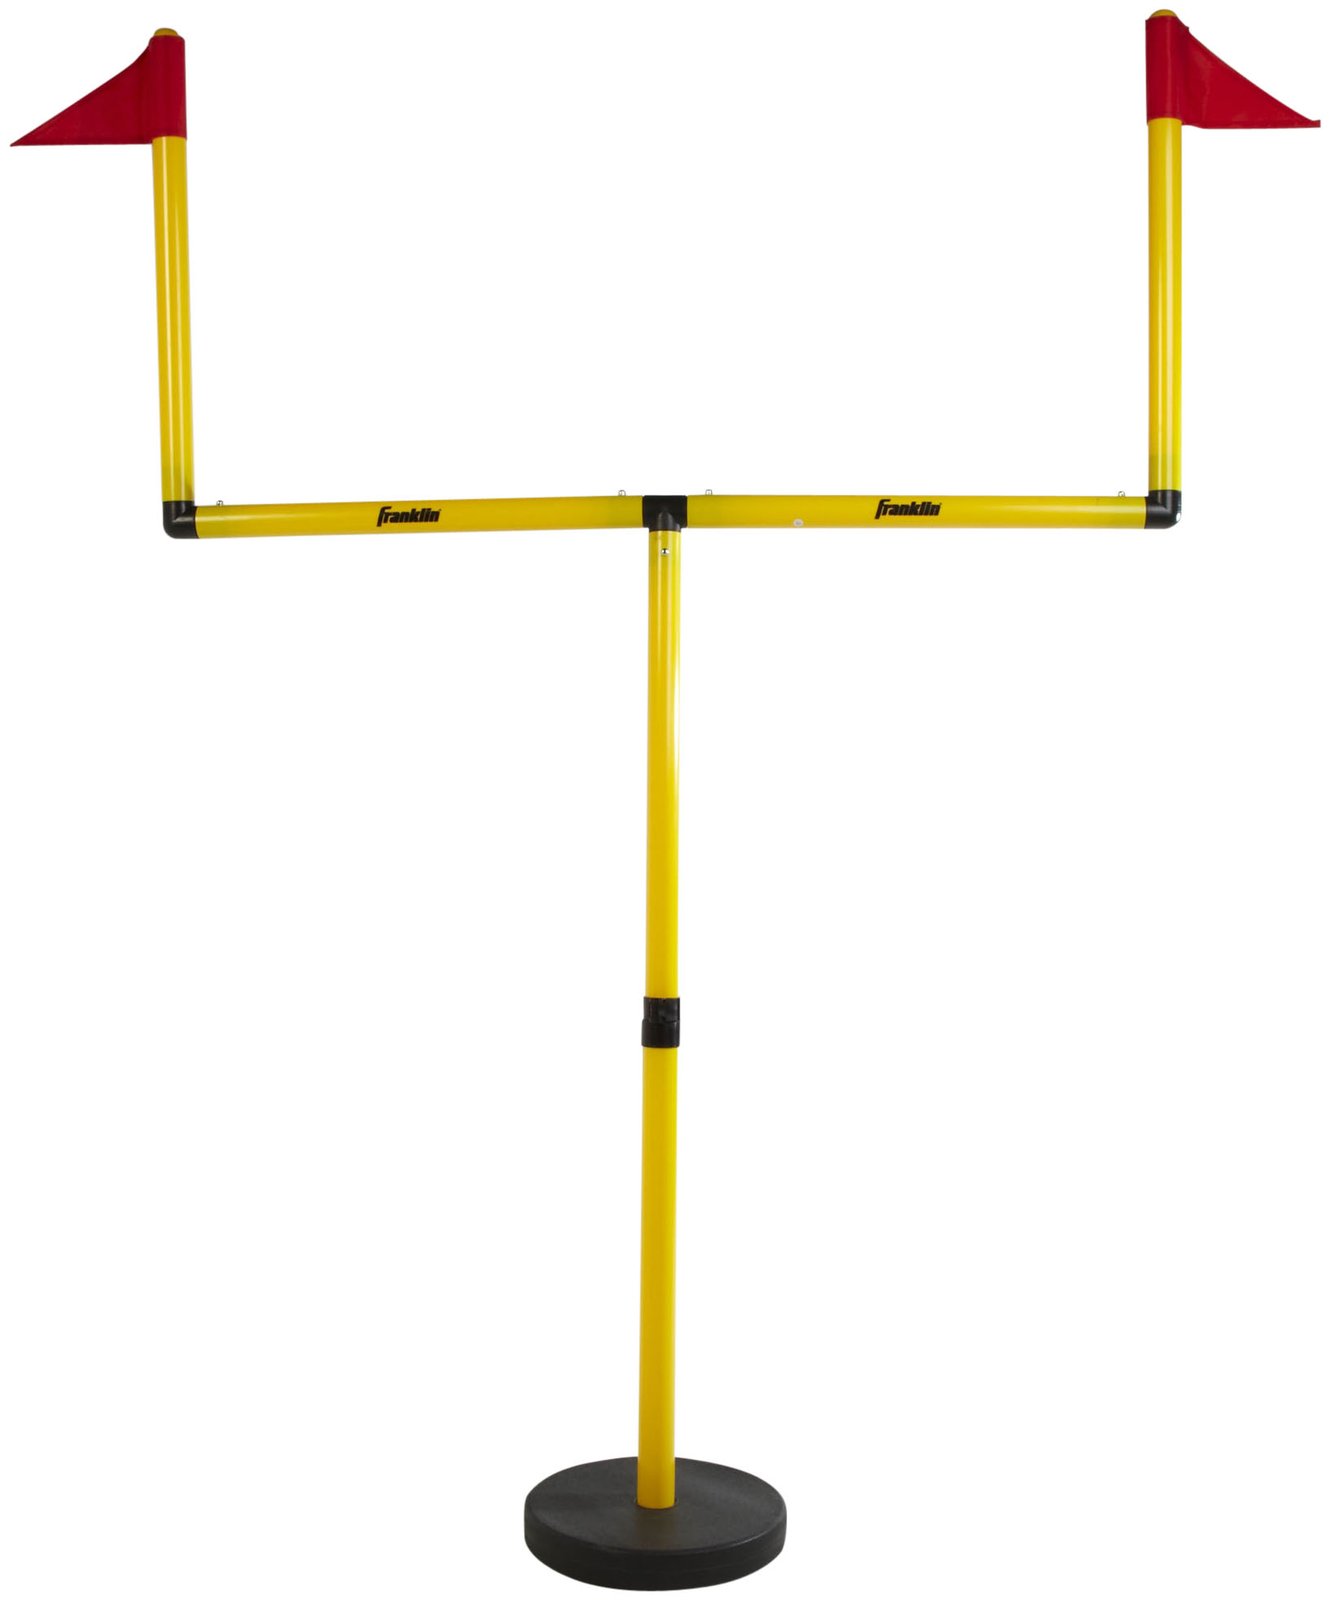 Football Goal Post Pictures   Clipart Best